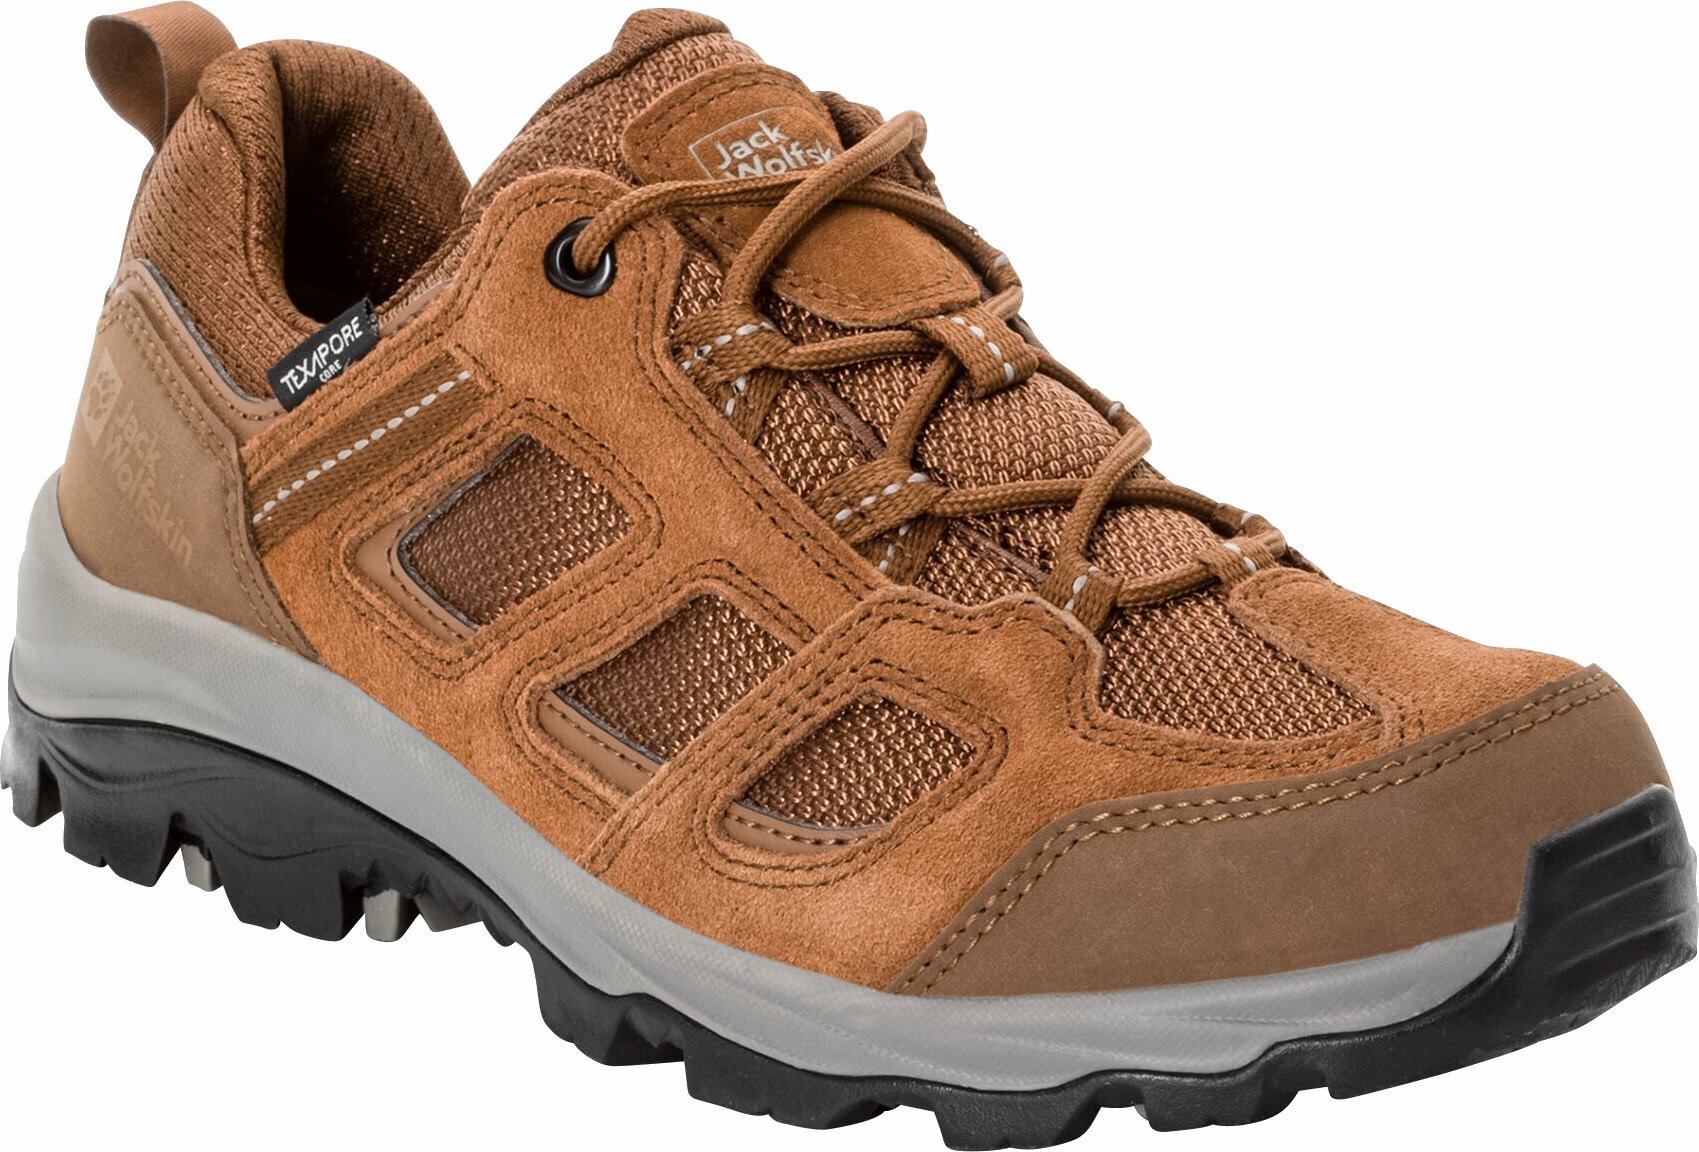 Womens Outdoor Shoes Jack Wolfskin Vojo 3 Texapore Low W Squirrel 39,5 Womens Outdoor Shoes